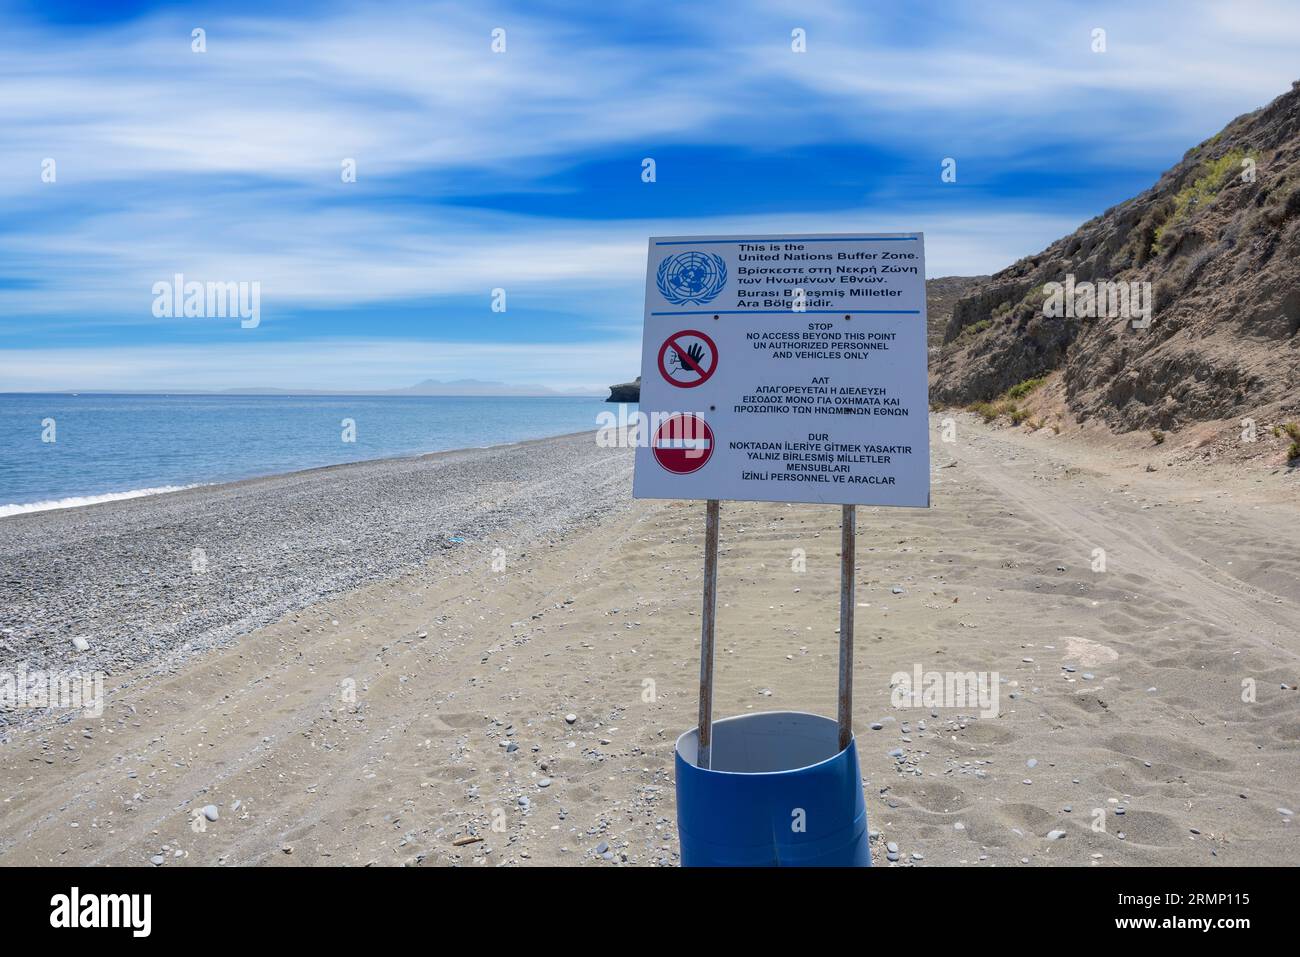 Begining of the united nations buffer zone at Morphu Bay , Cyprus. Stock Photo